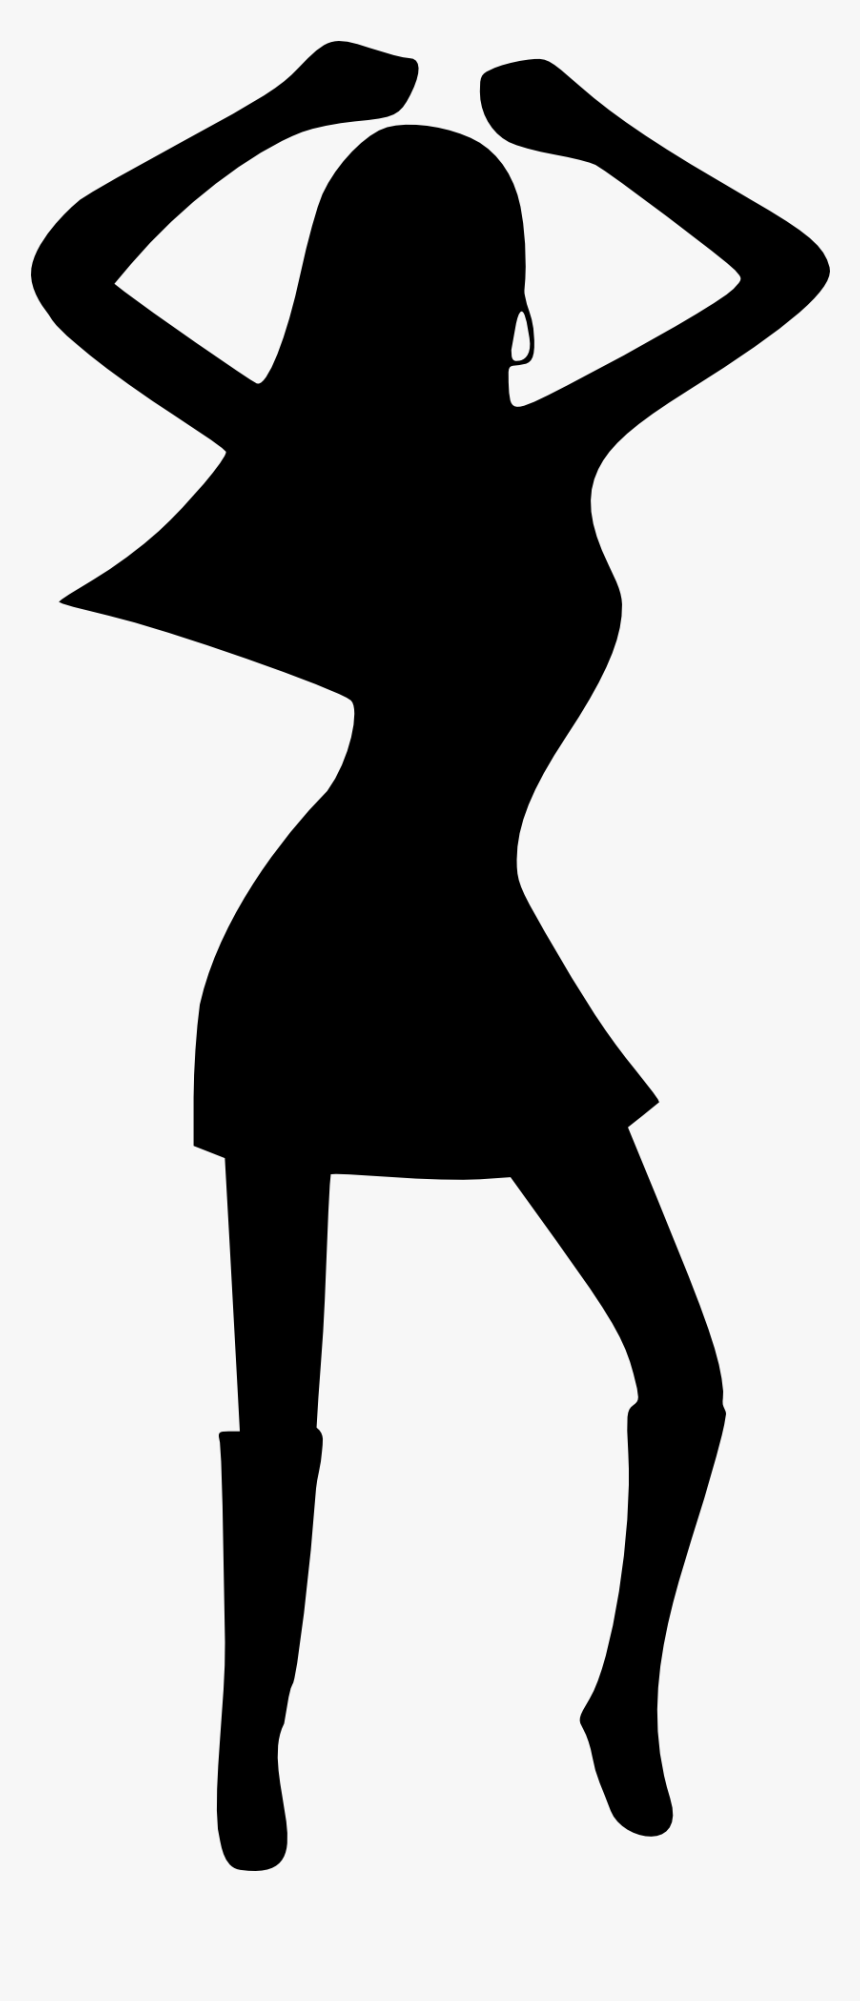 Dance Party Disco Silhouette - Disco Dancing Silhouette Png, Transparent Png, Free Download